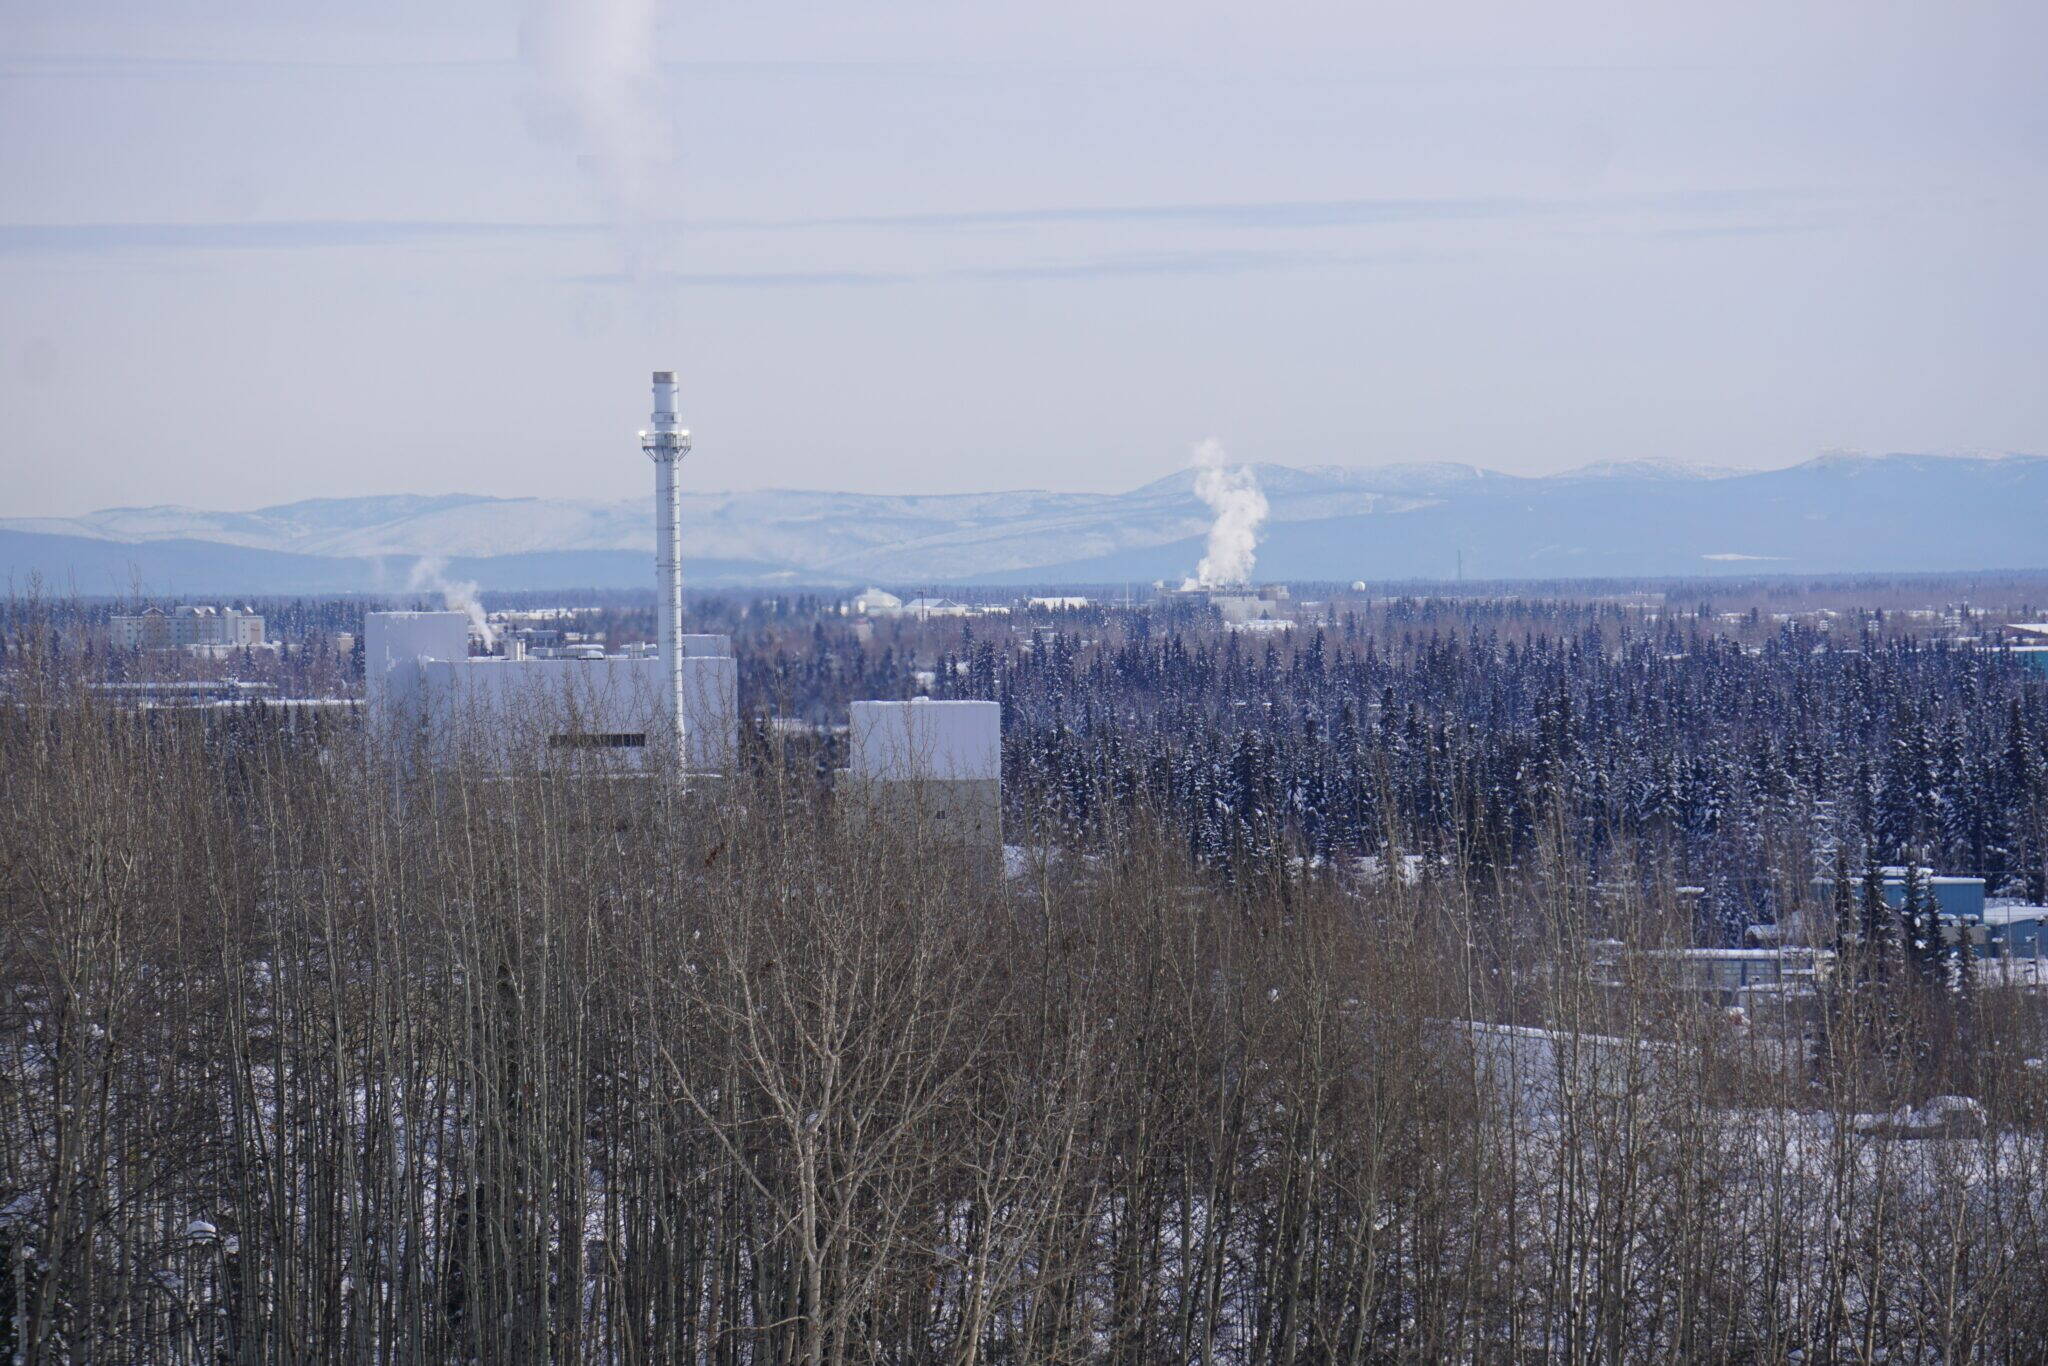 Smokestack emissions are seen along the Fairbanks skyline on March 1, 2023. At left is the coal-fired heat and power plant on the University of Alaska Fairbanks campus. (Yereth Rosen/Alaska Beacon)